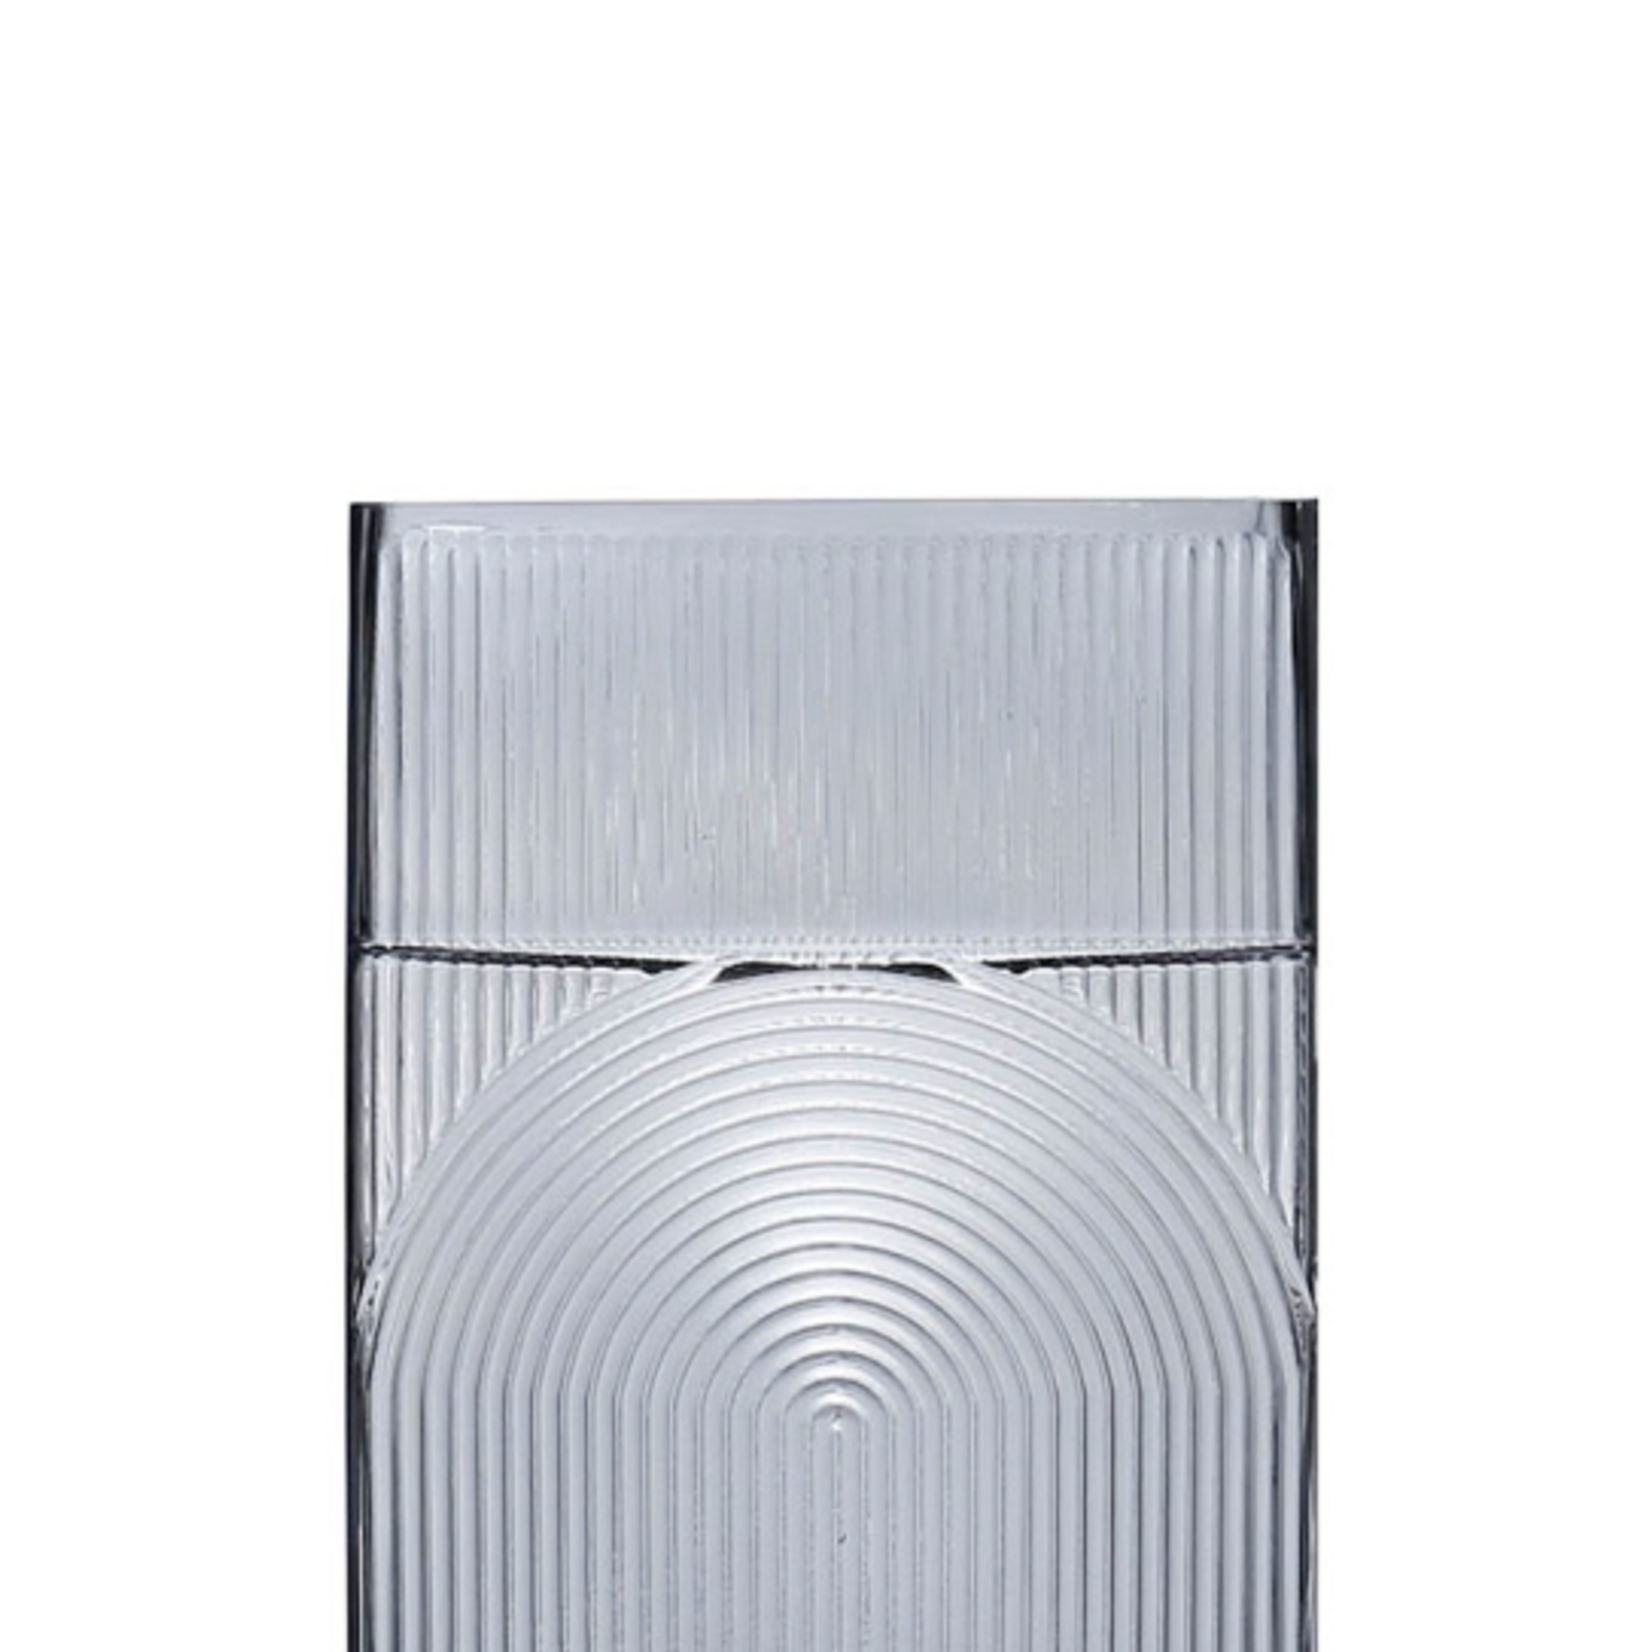 12”H X 6” X 2.75” GREY GLASS RIBBED/FLUTED RECTANGLE